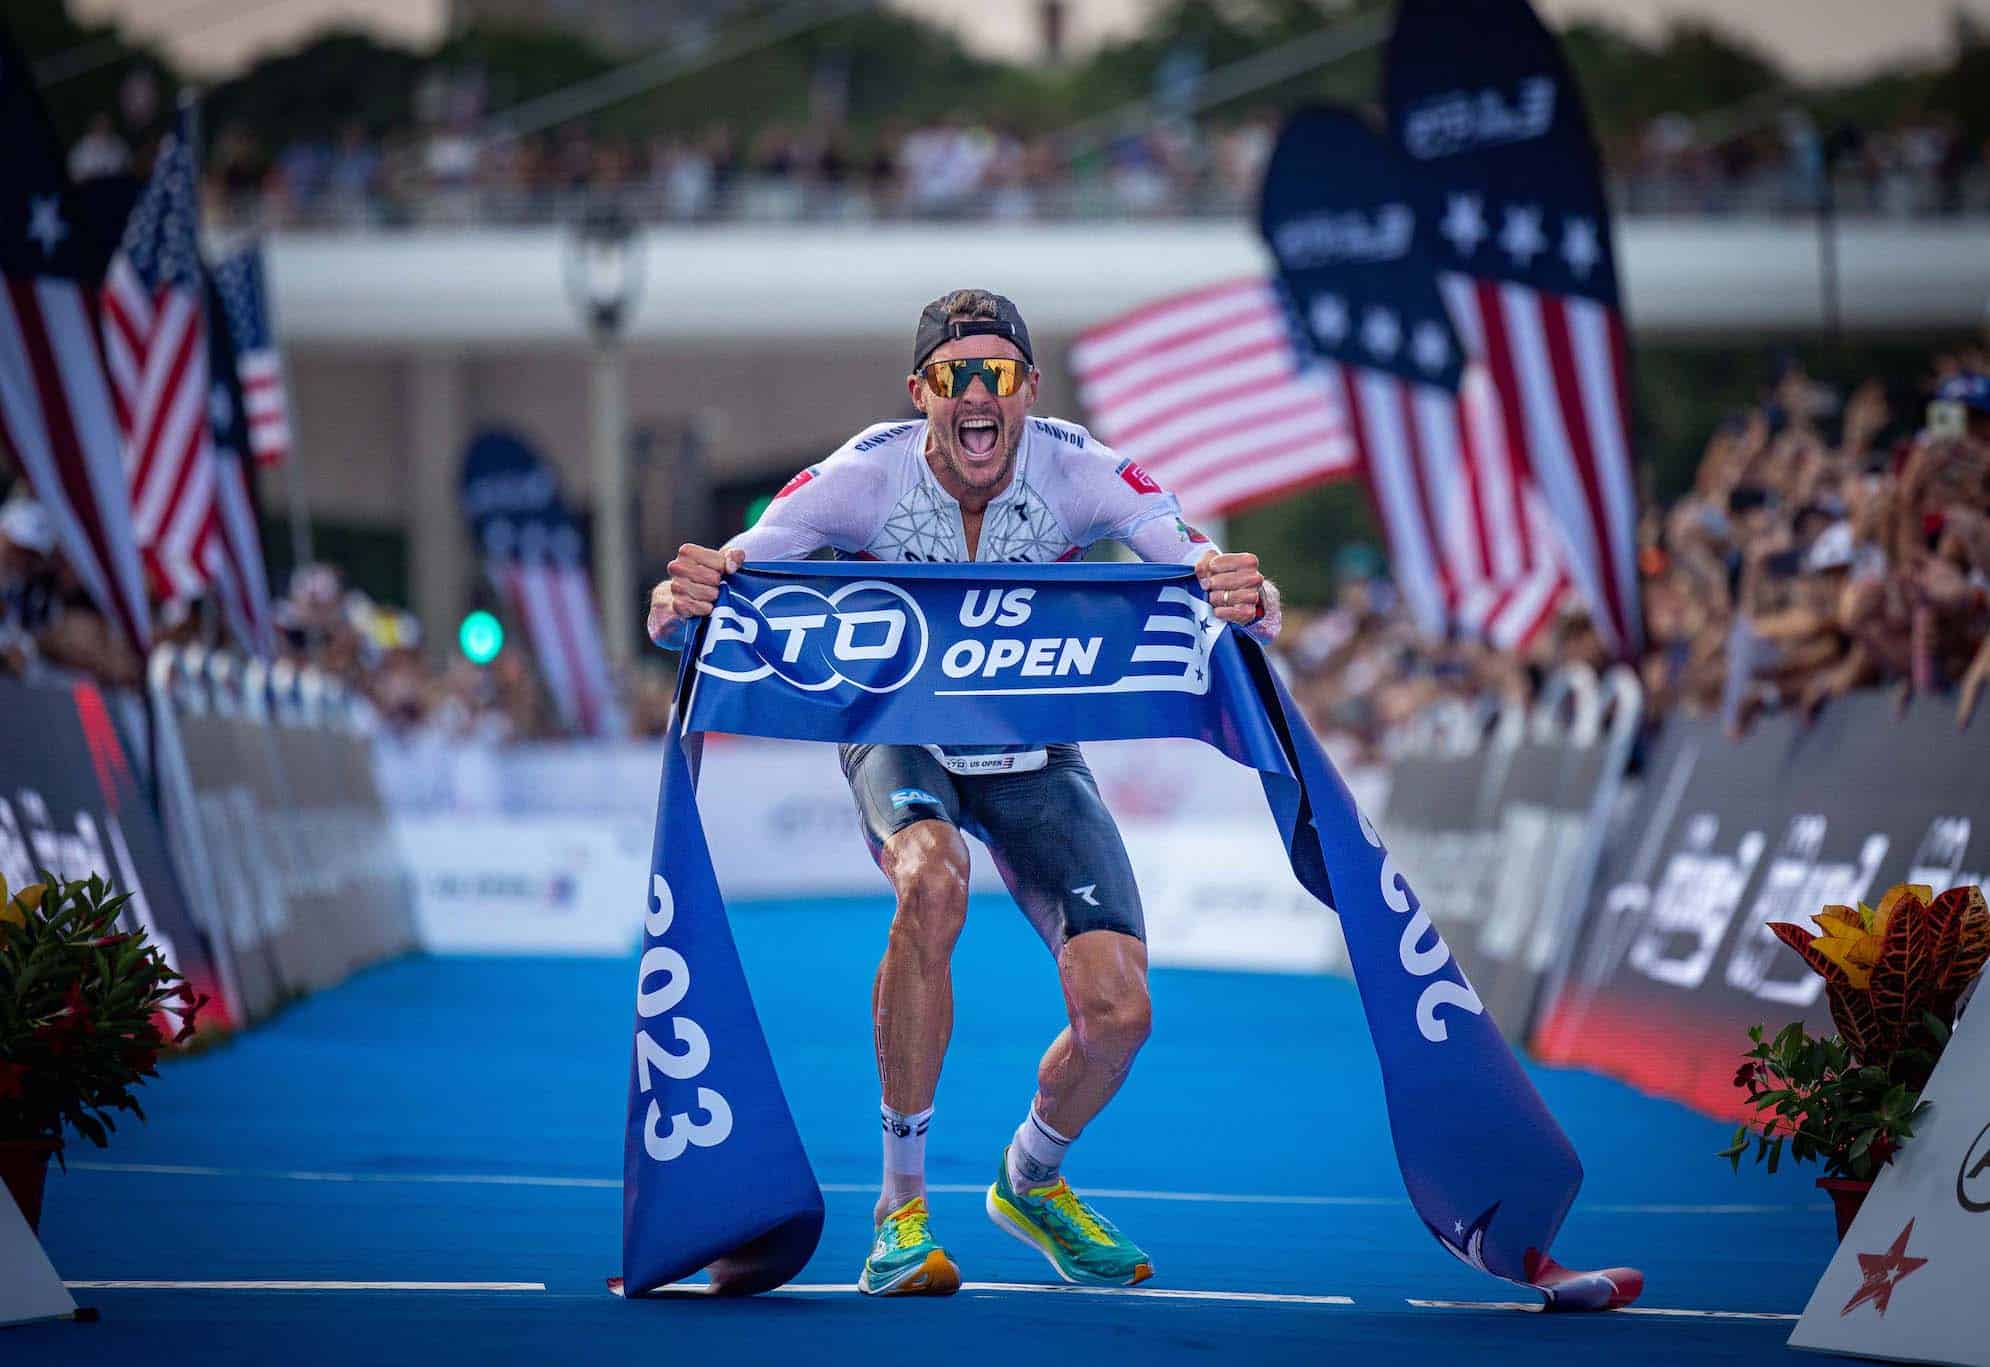 Frodeno Dominates 2023 US PTO Race with Stunning Performance